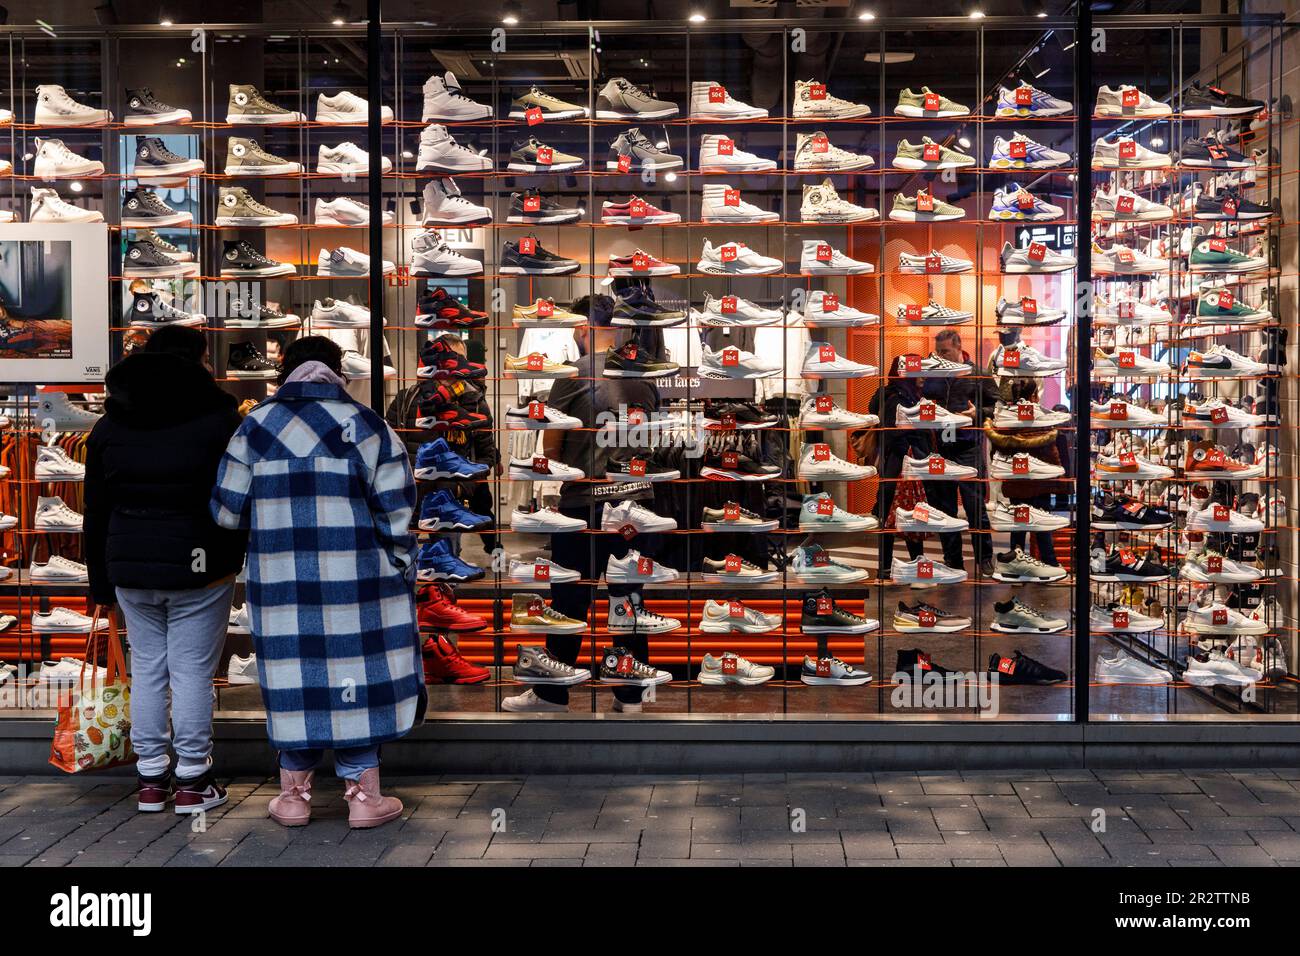 shop windows of the Snipes store on the shopping street shop for sneaker and streetwear, Germany. Schaufenster des Snipes Stor Photo - Alamy